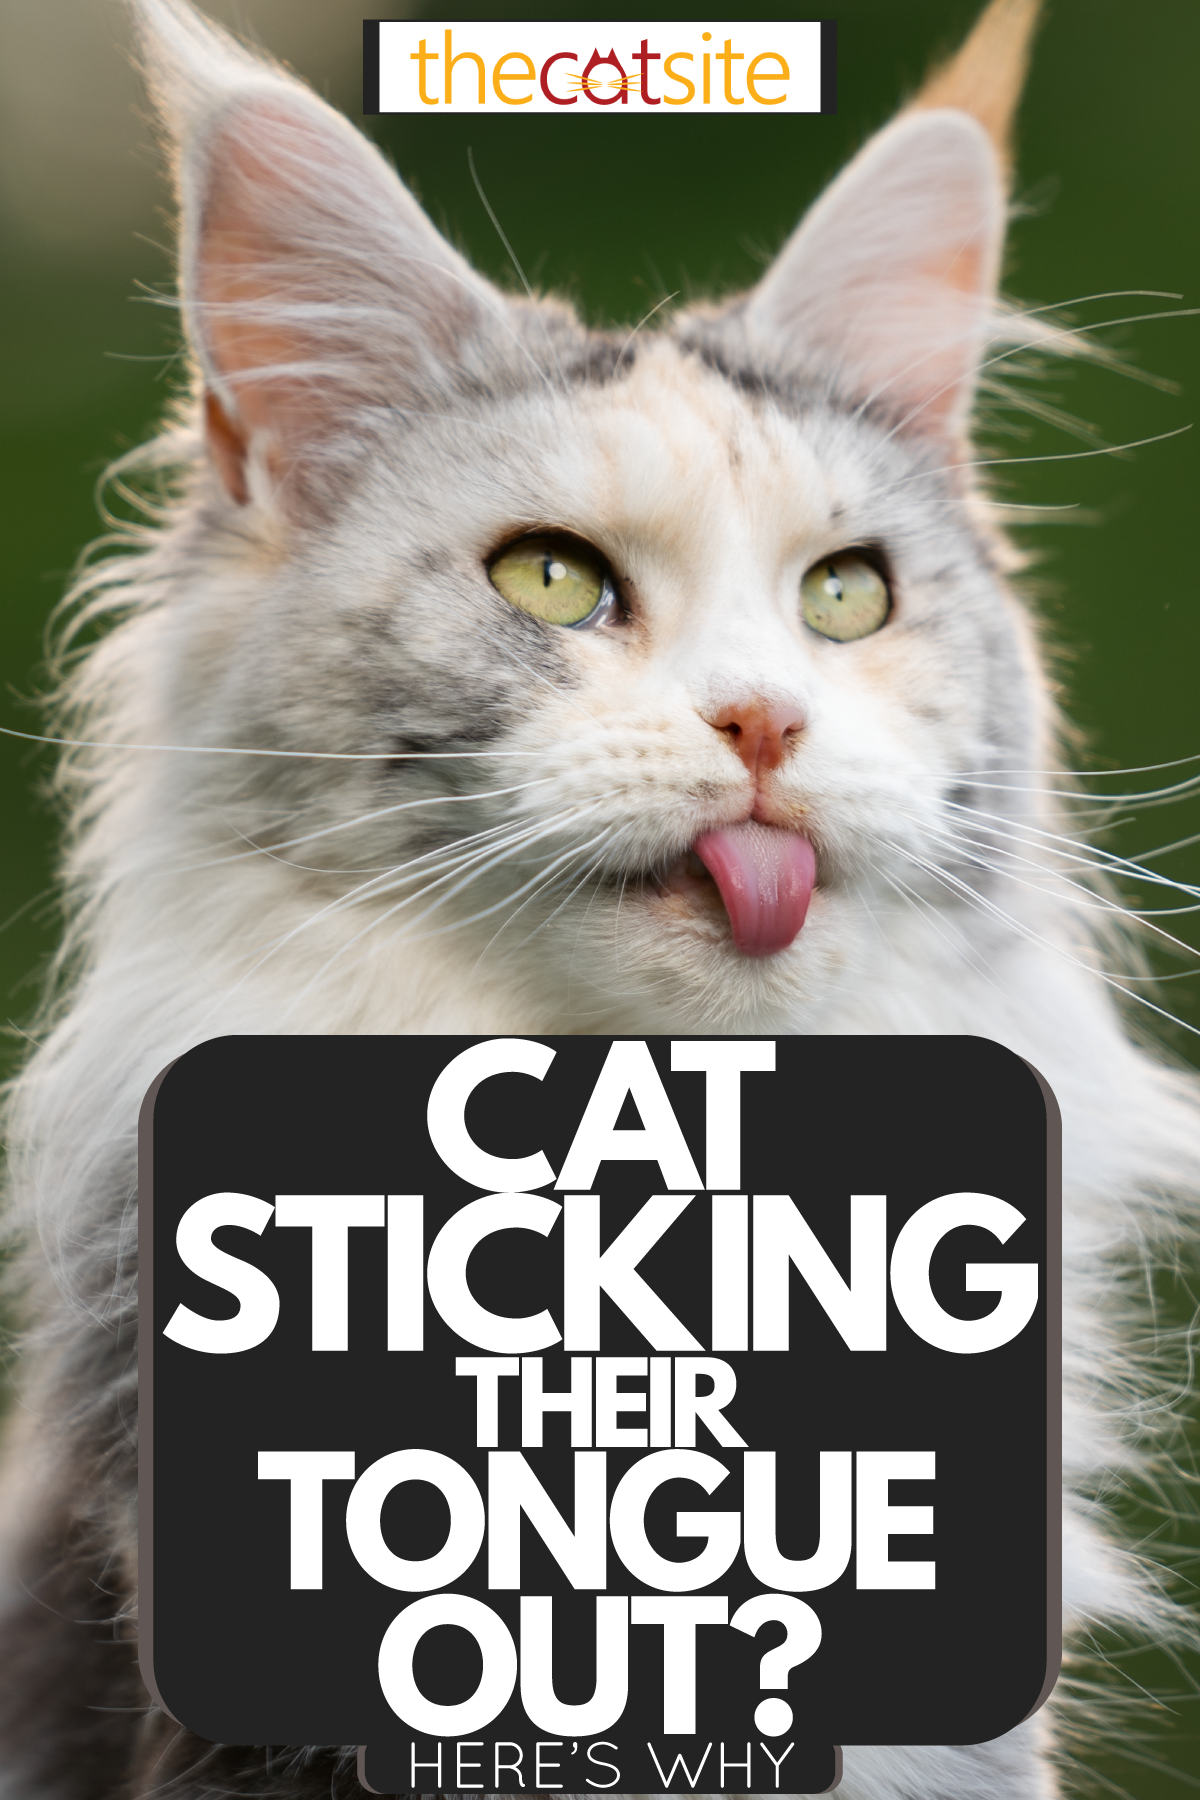 A gorgeous maine coon cat sticking out his tongue for no reason, Cat Sticking Their Tongue Out? [Here's Why]